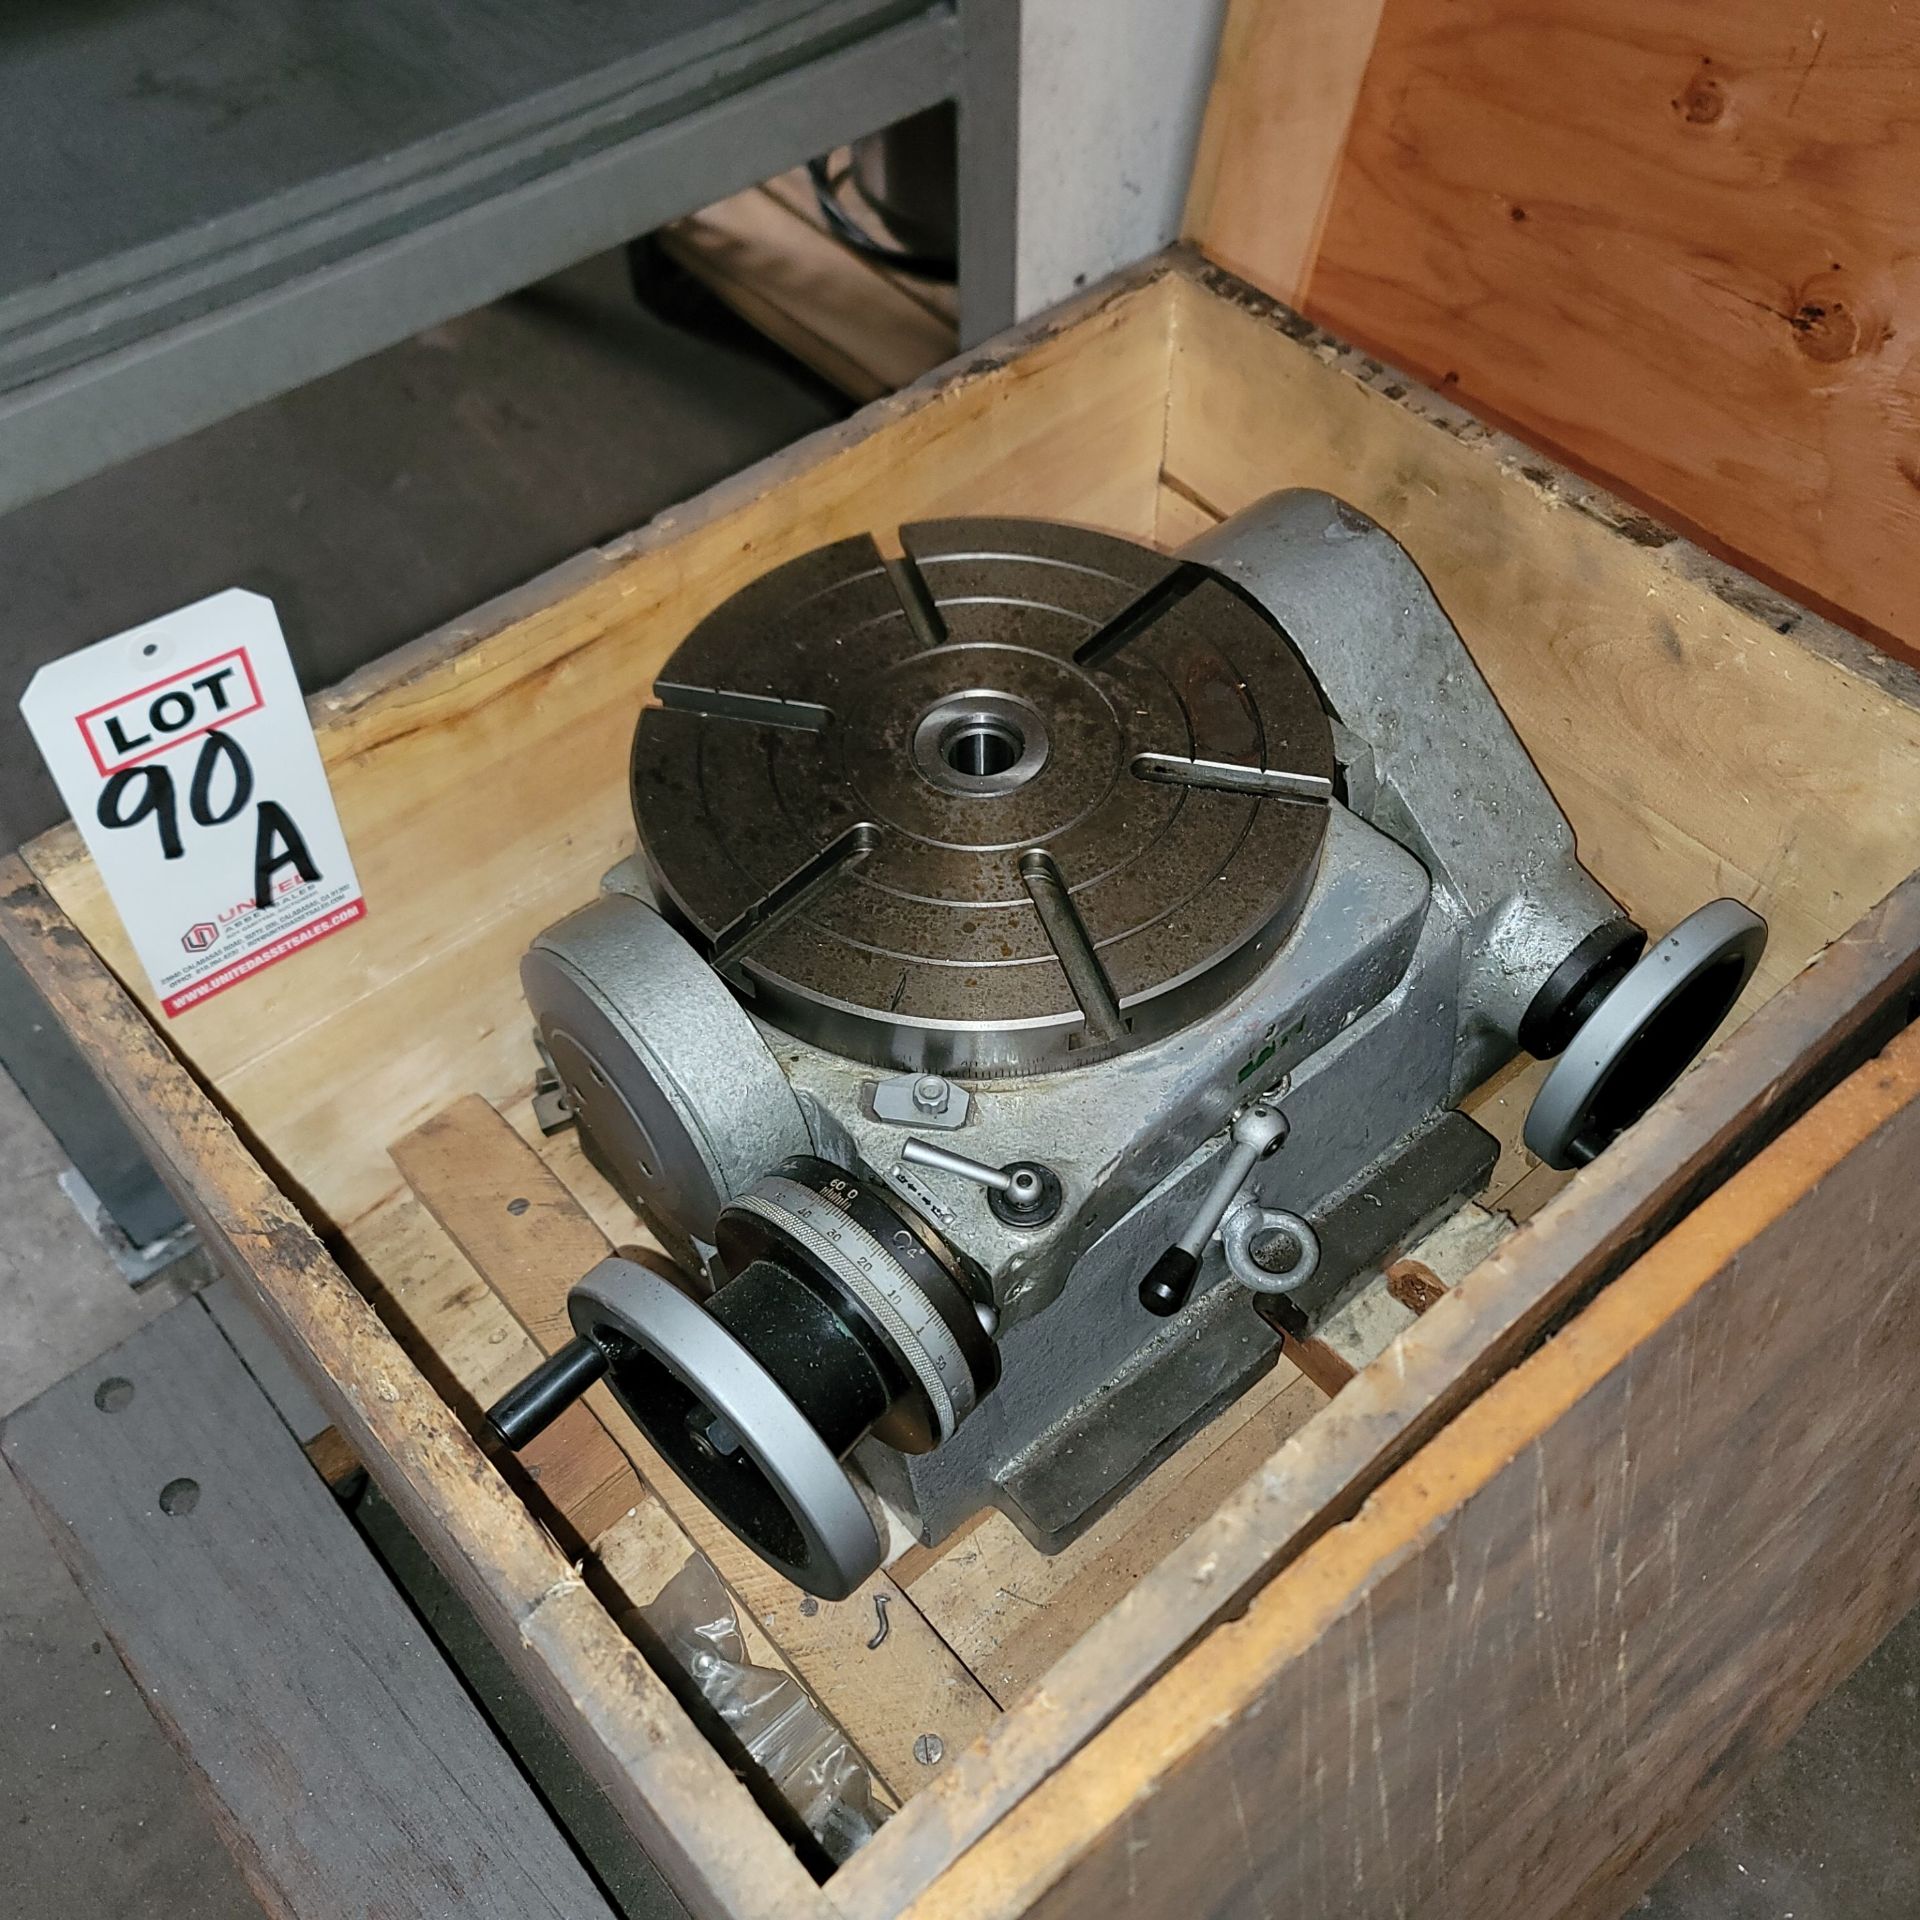 10" ROTARY TABLE, IN CRATE